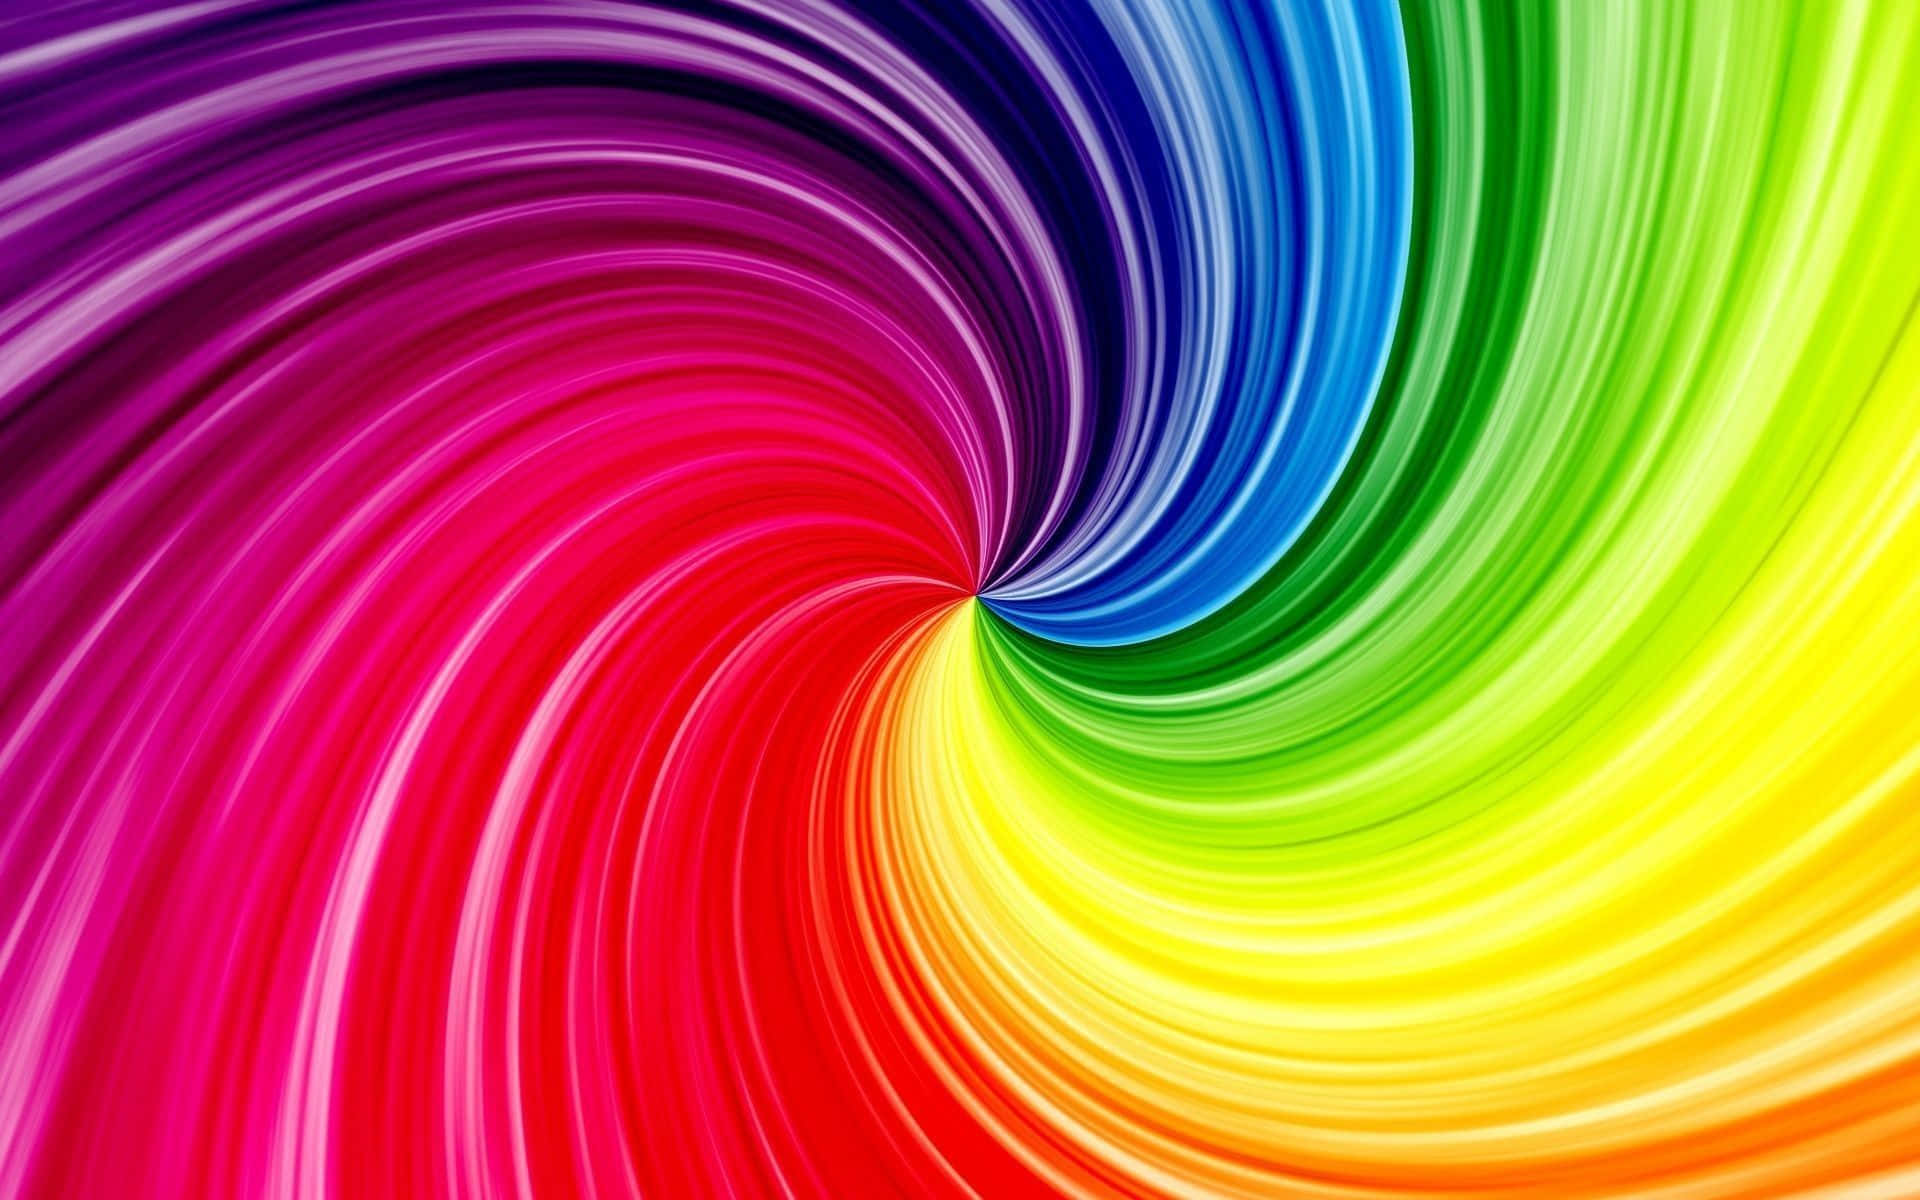 100+] Neon Colors Backgrounds